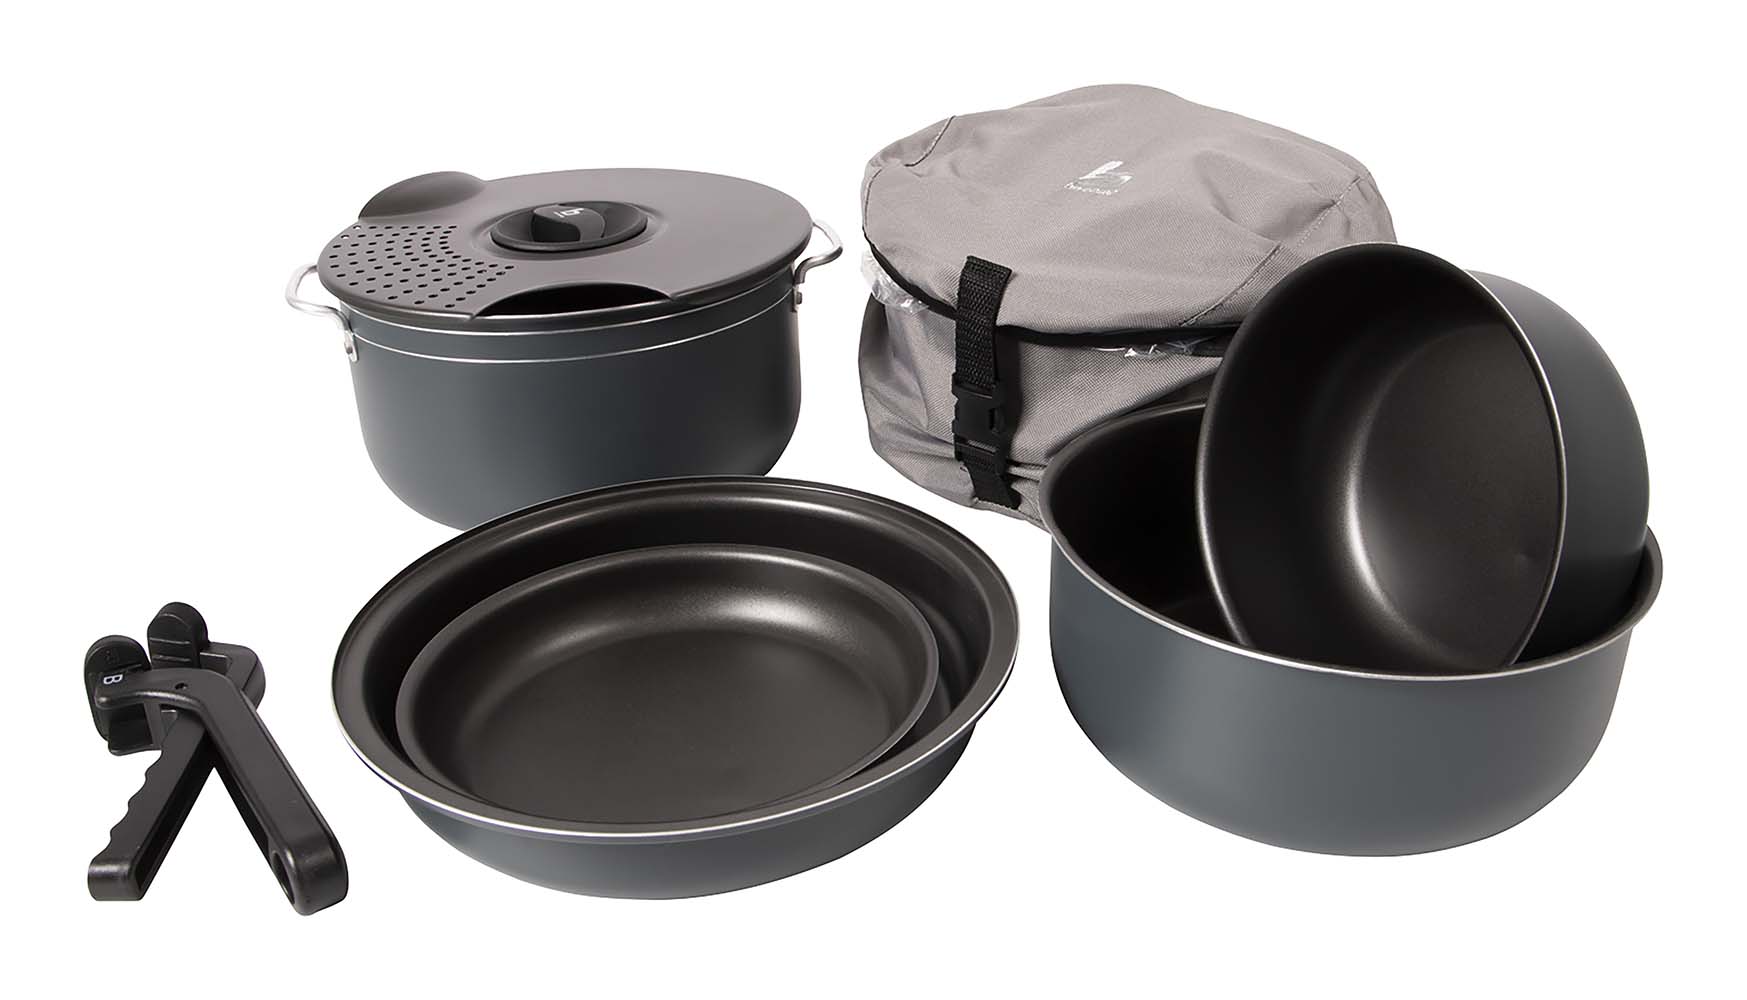 2300350 A complete and extremely compact 7 part cookware set. All pans from this set have a powder coating outside and a non-stick coating on the inside. By using aluminium this cooking set is extremely lightweight. These aluminium pans can be used on gas, ceramic and electrical heat sources. This pan set consists of 3 sauce pans, 2 frying pans, a strainer lid and loose pan handle. The supplied protective cover ensures that the full set can be stored compact. Dimensions of cooking pans (Øxh): 23x12, 21x8 and 17x7 cm. Dimensions of frying pans (Øxh): 24x4.5 and 18.5x3 cm. Dimensions nested (Øxh): 24x16 cm. Contents: 1,4, 2,5 and 4.4 litres.